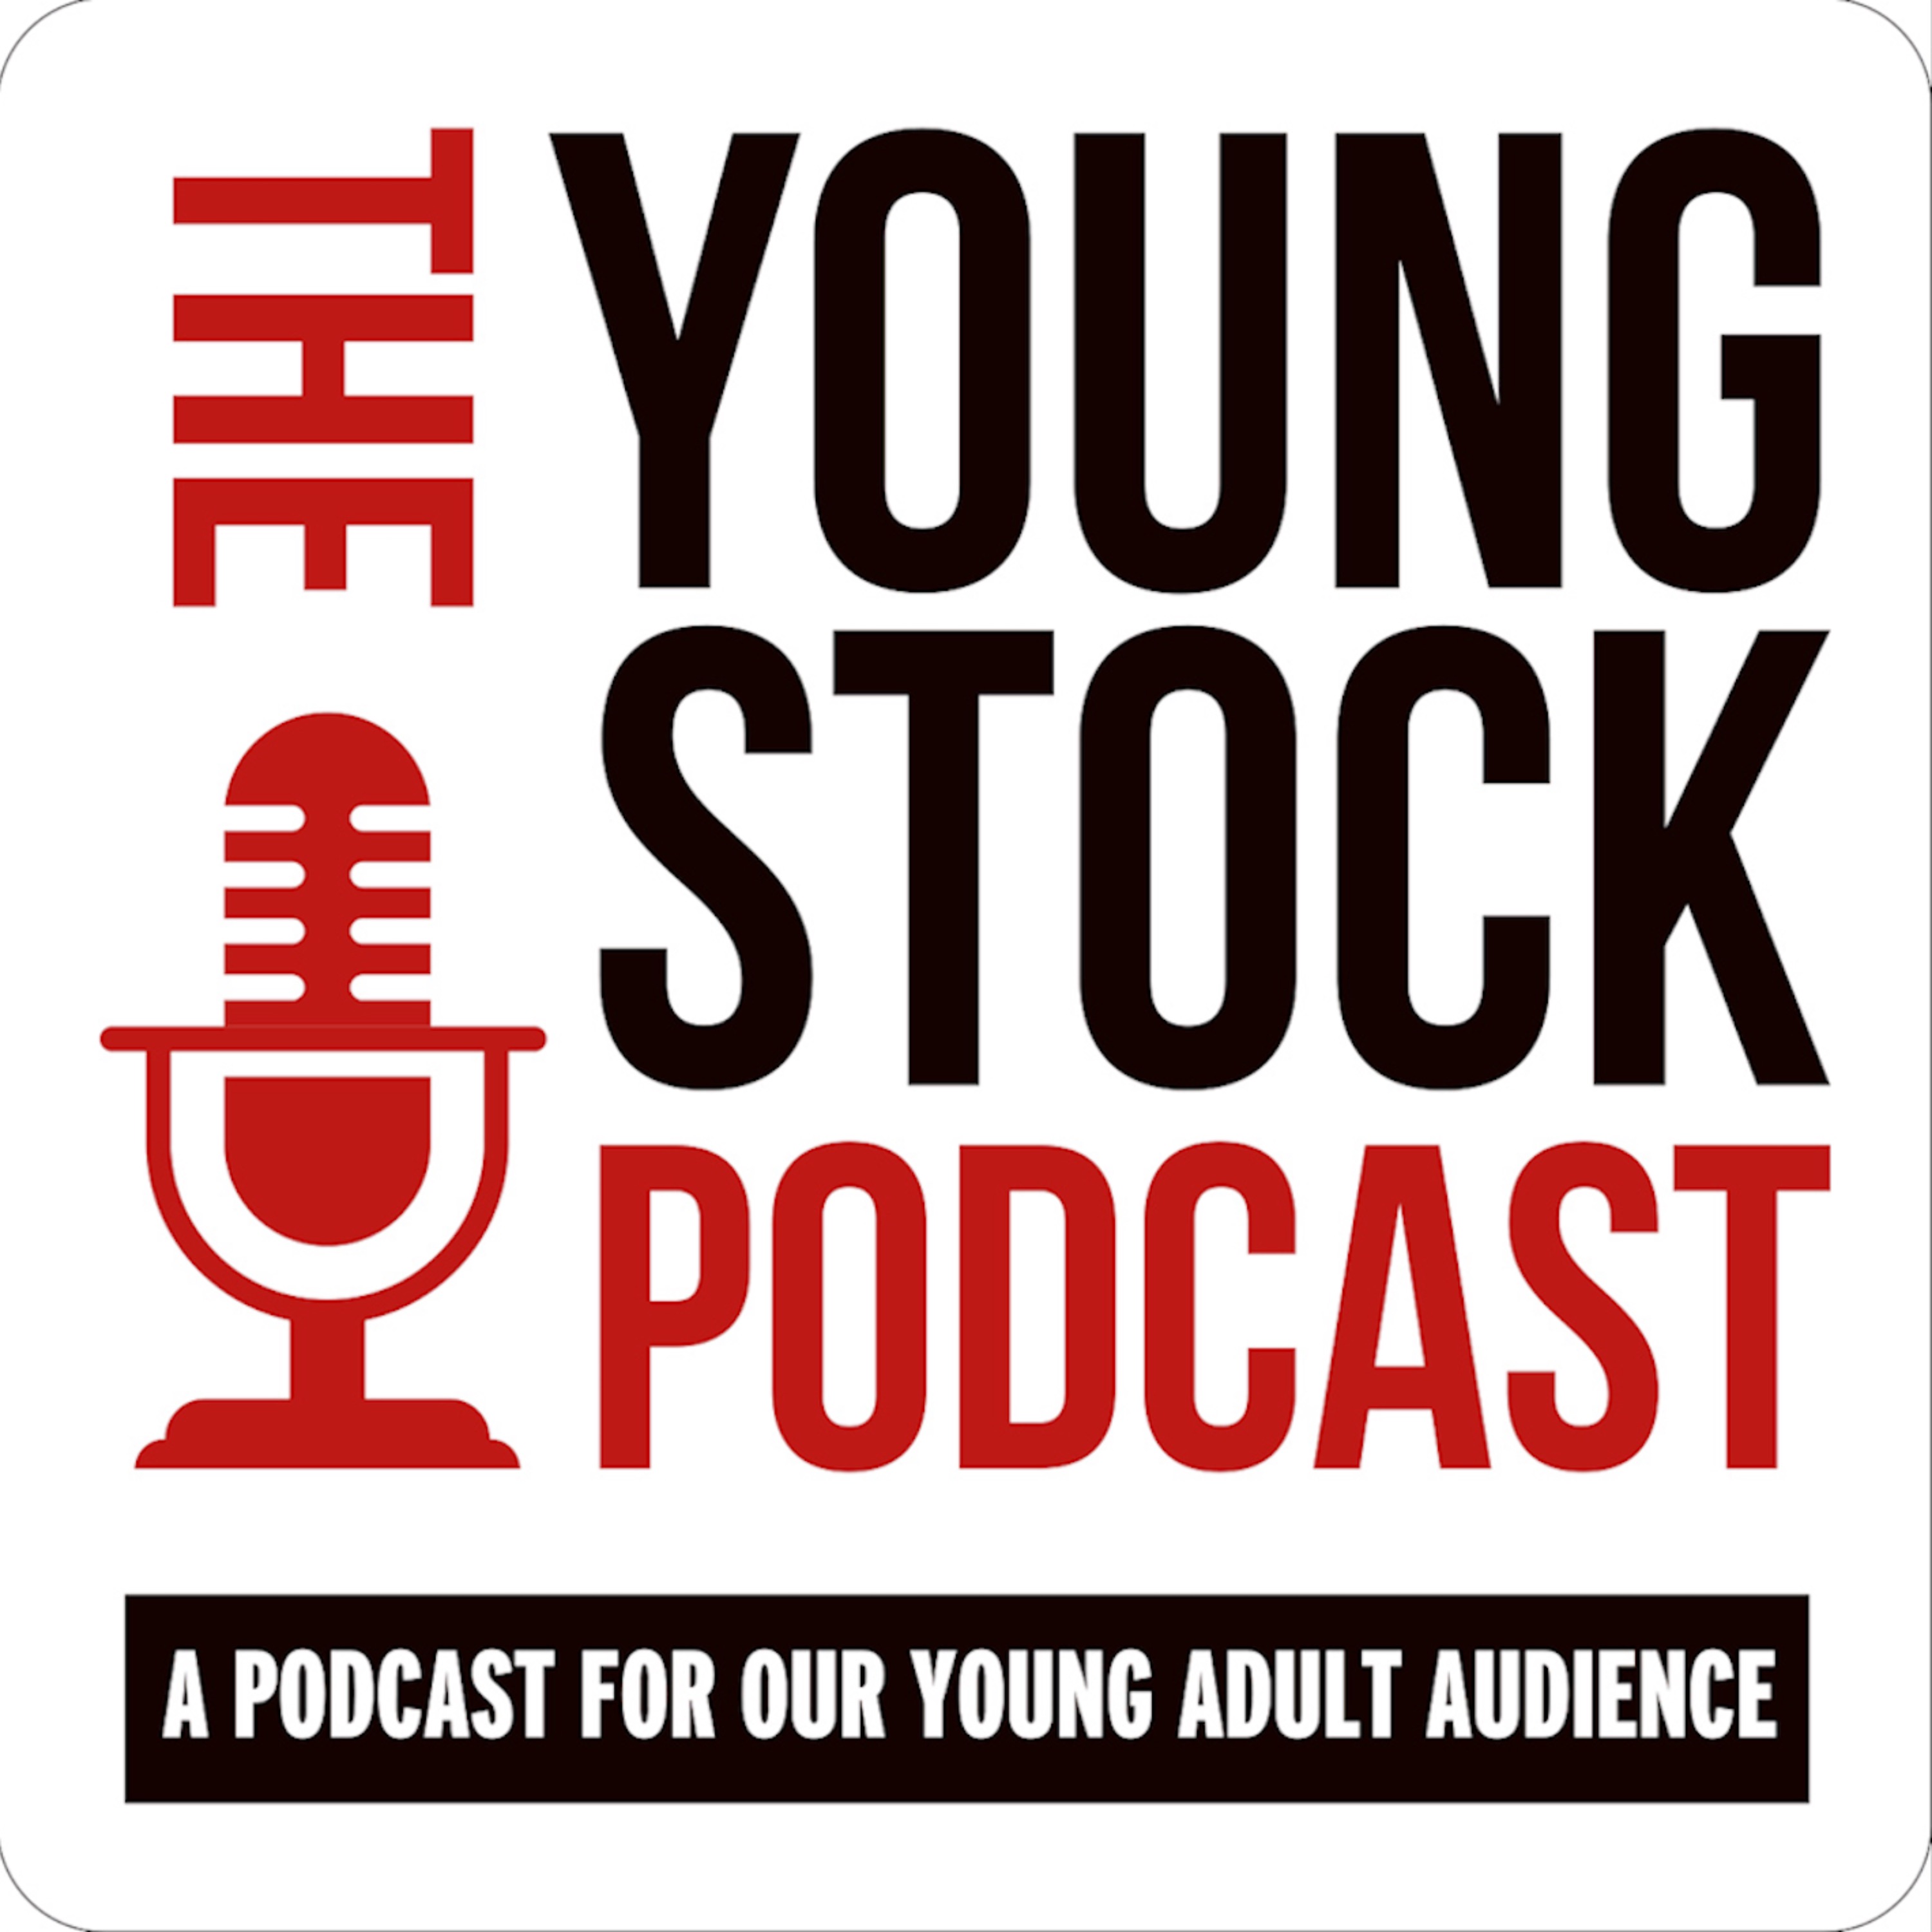 Ep 999: Young Stock Podcast -  Episode 93 - What is involved with solar farm leases